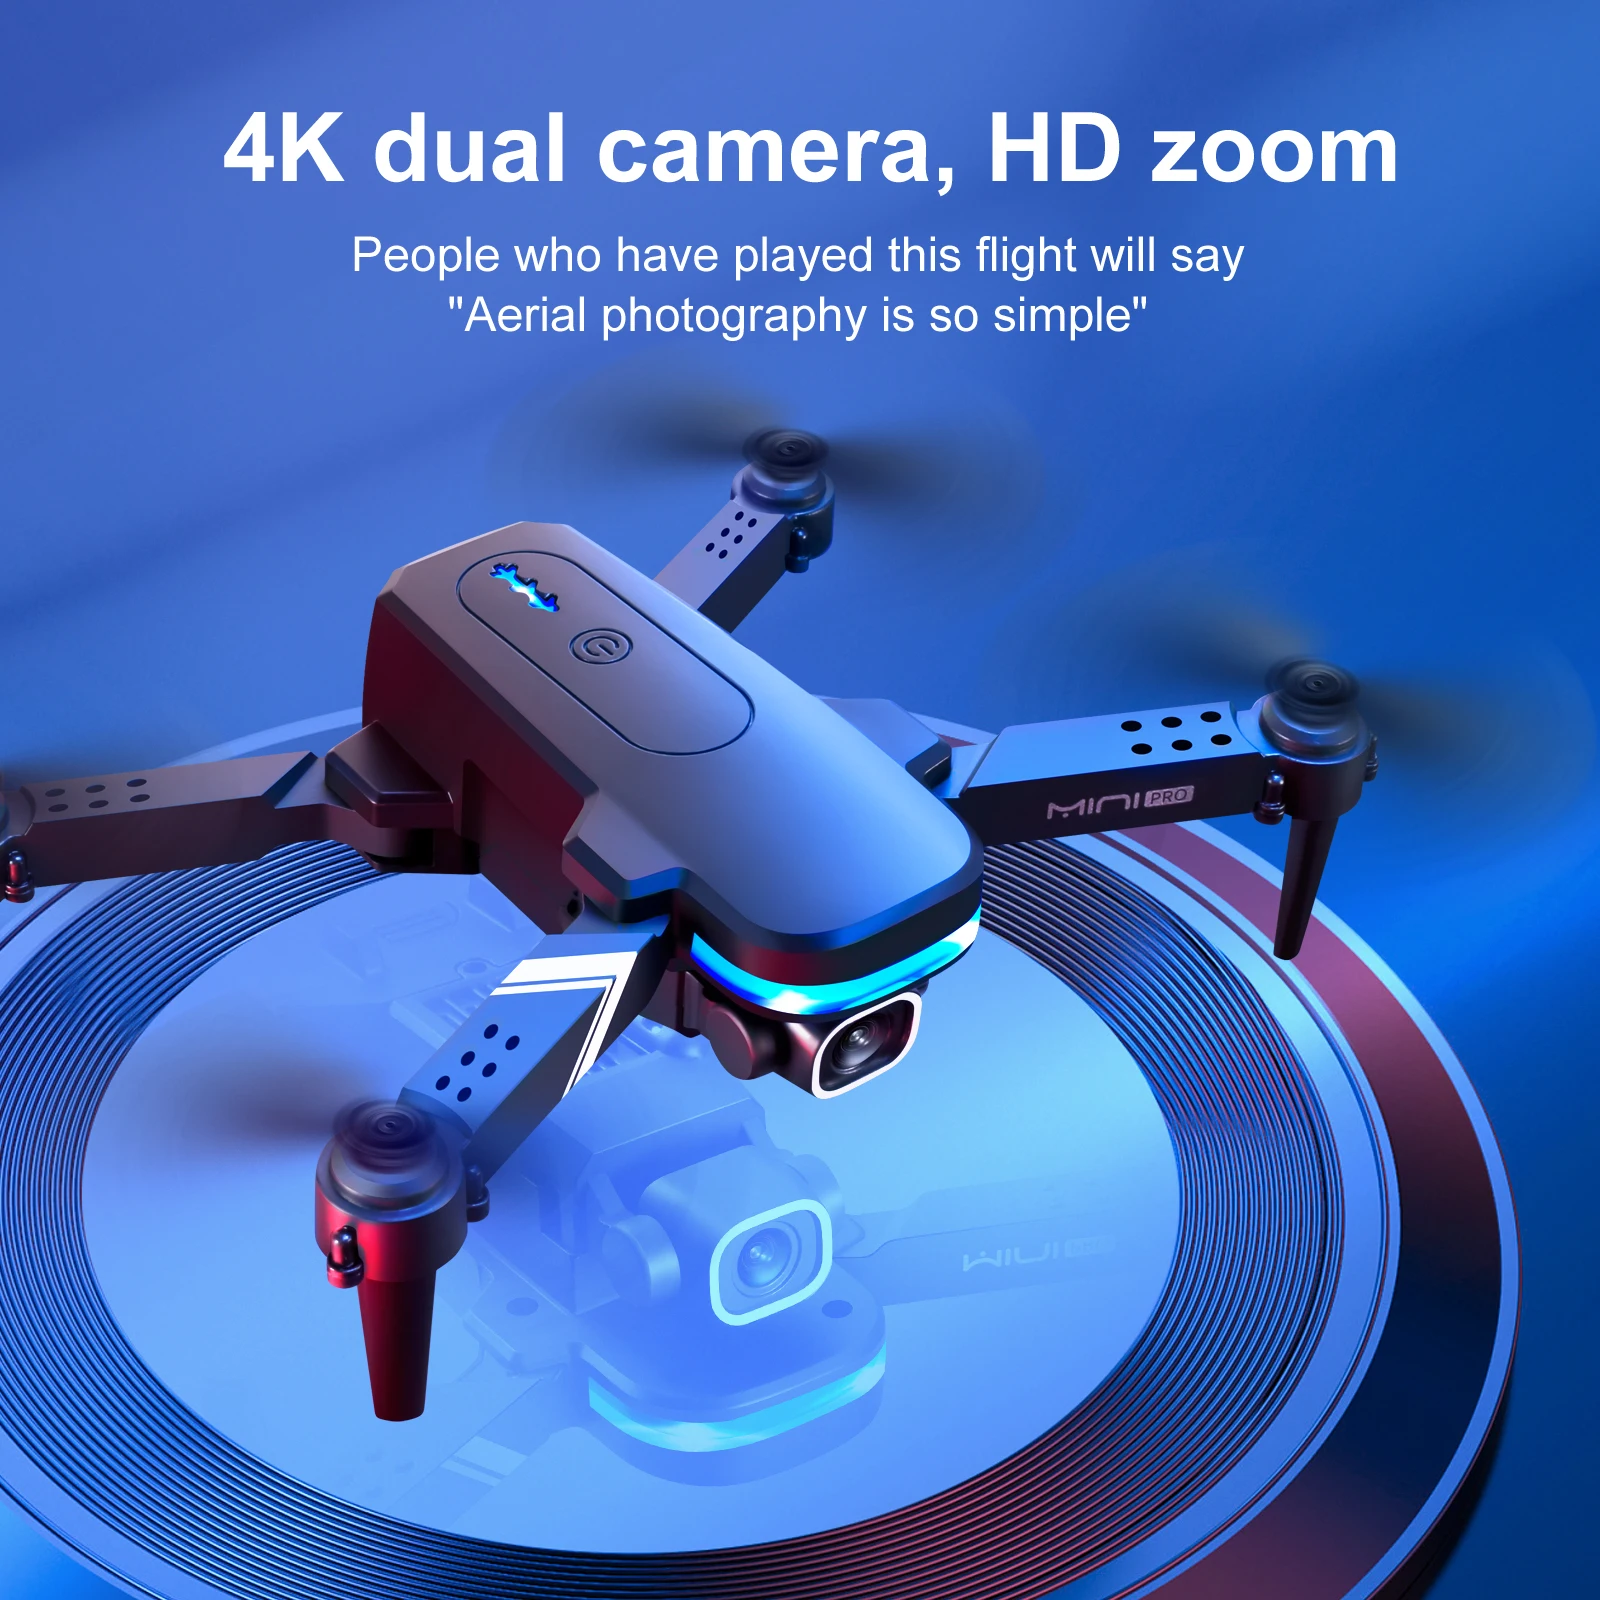 Drone 4k Professional  Boy's Toy Fpv Drone rc Aircraft Camera hd 4krc Quadcopter Mini Drone 4k hd Cameraelicopteros a Control enlarge